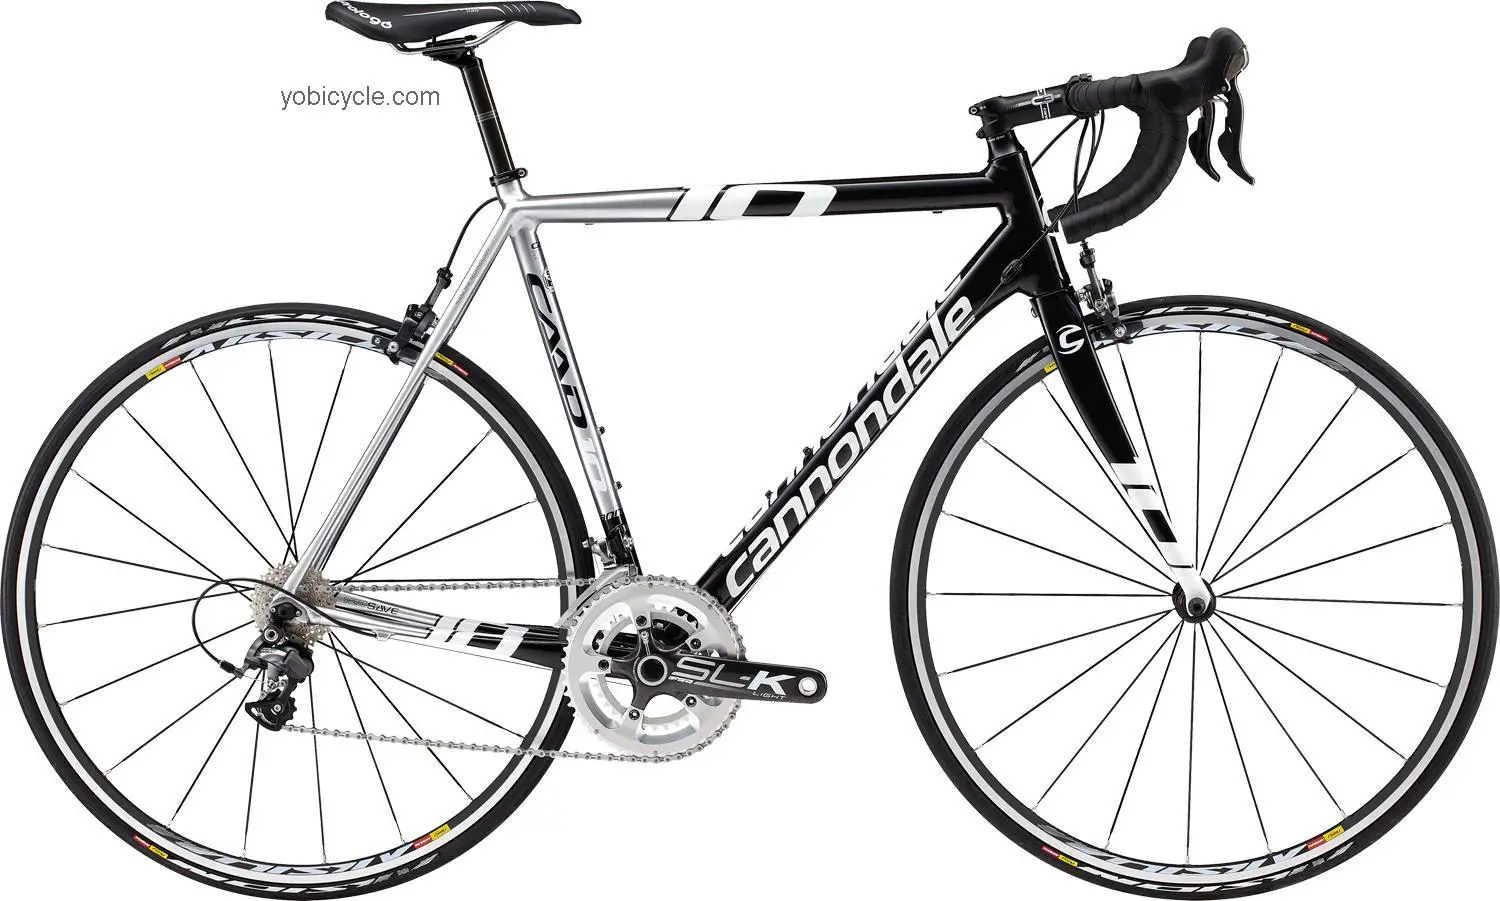 Cannondale CAAD10 3 Ultegra 2013 comparison online with competitors